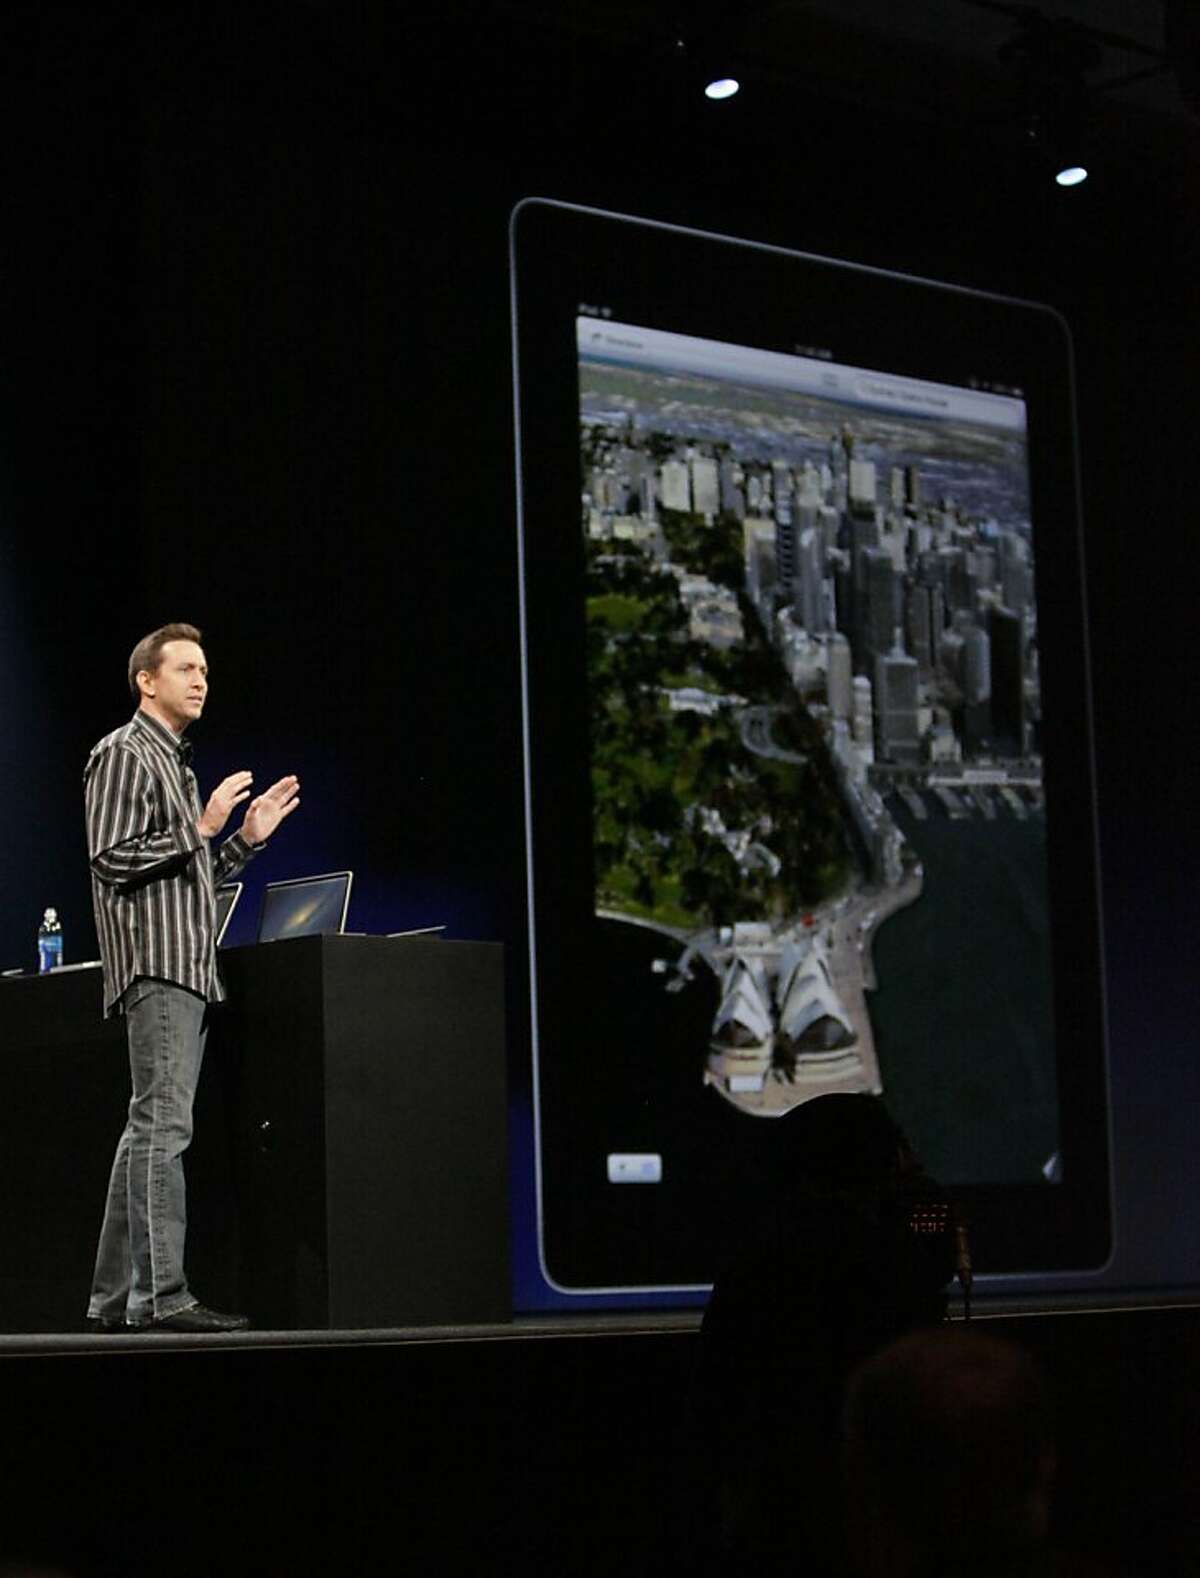 Apple Senior VP of iPhone Software Scott Forstall demonstrates Flyover, part of the new map application featured on iOS 6, during the keynote at the Worldwide Developers Conference 2012 at Moscone West on Monday, June 11, 2012 in San Francisco, Calif.